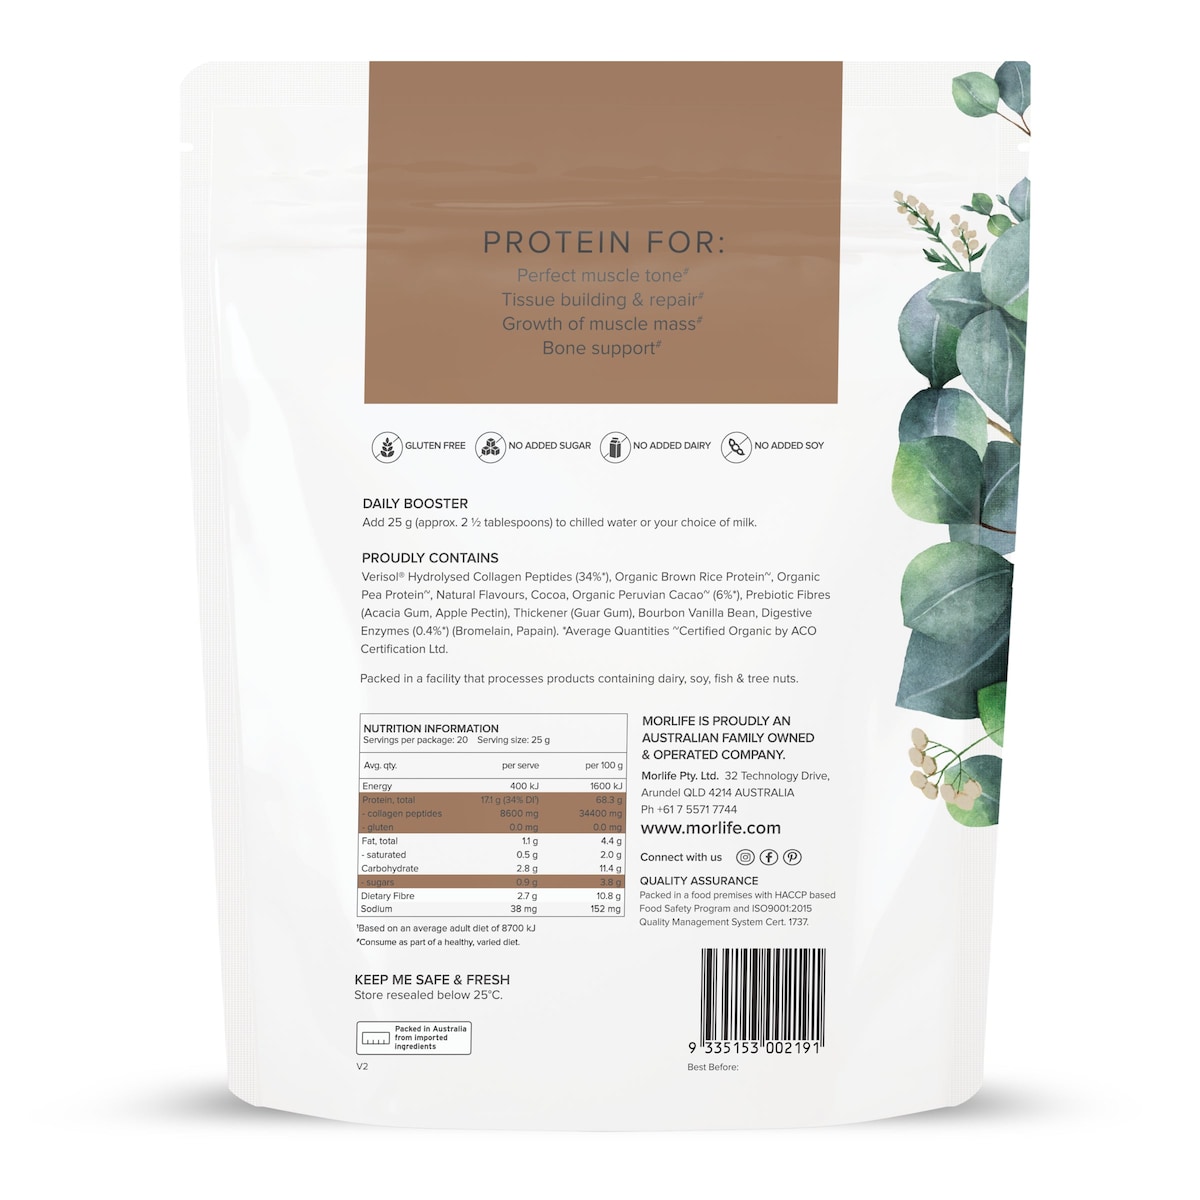 Morlife Beauty Protein Double Choc 500g